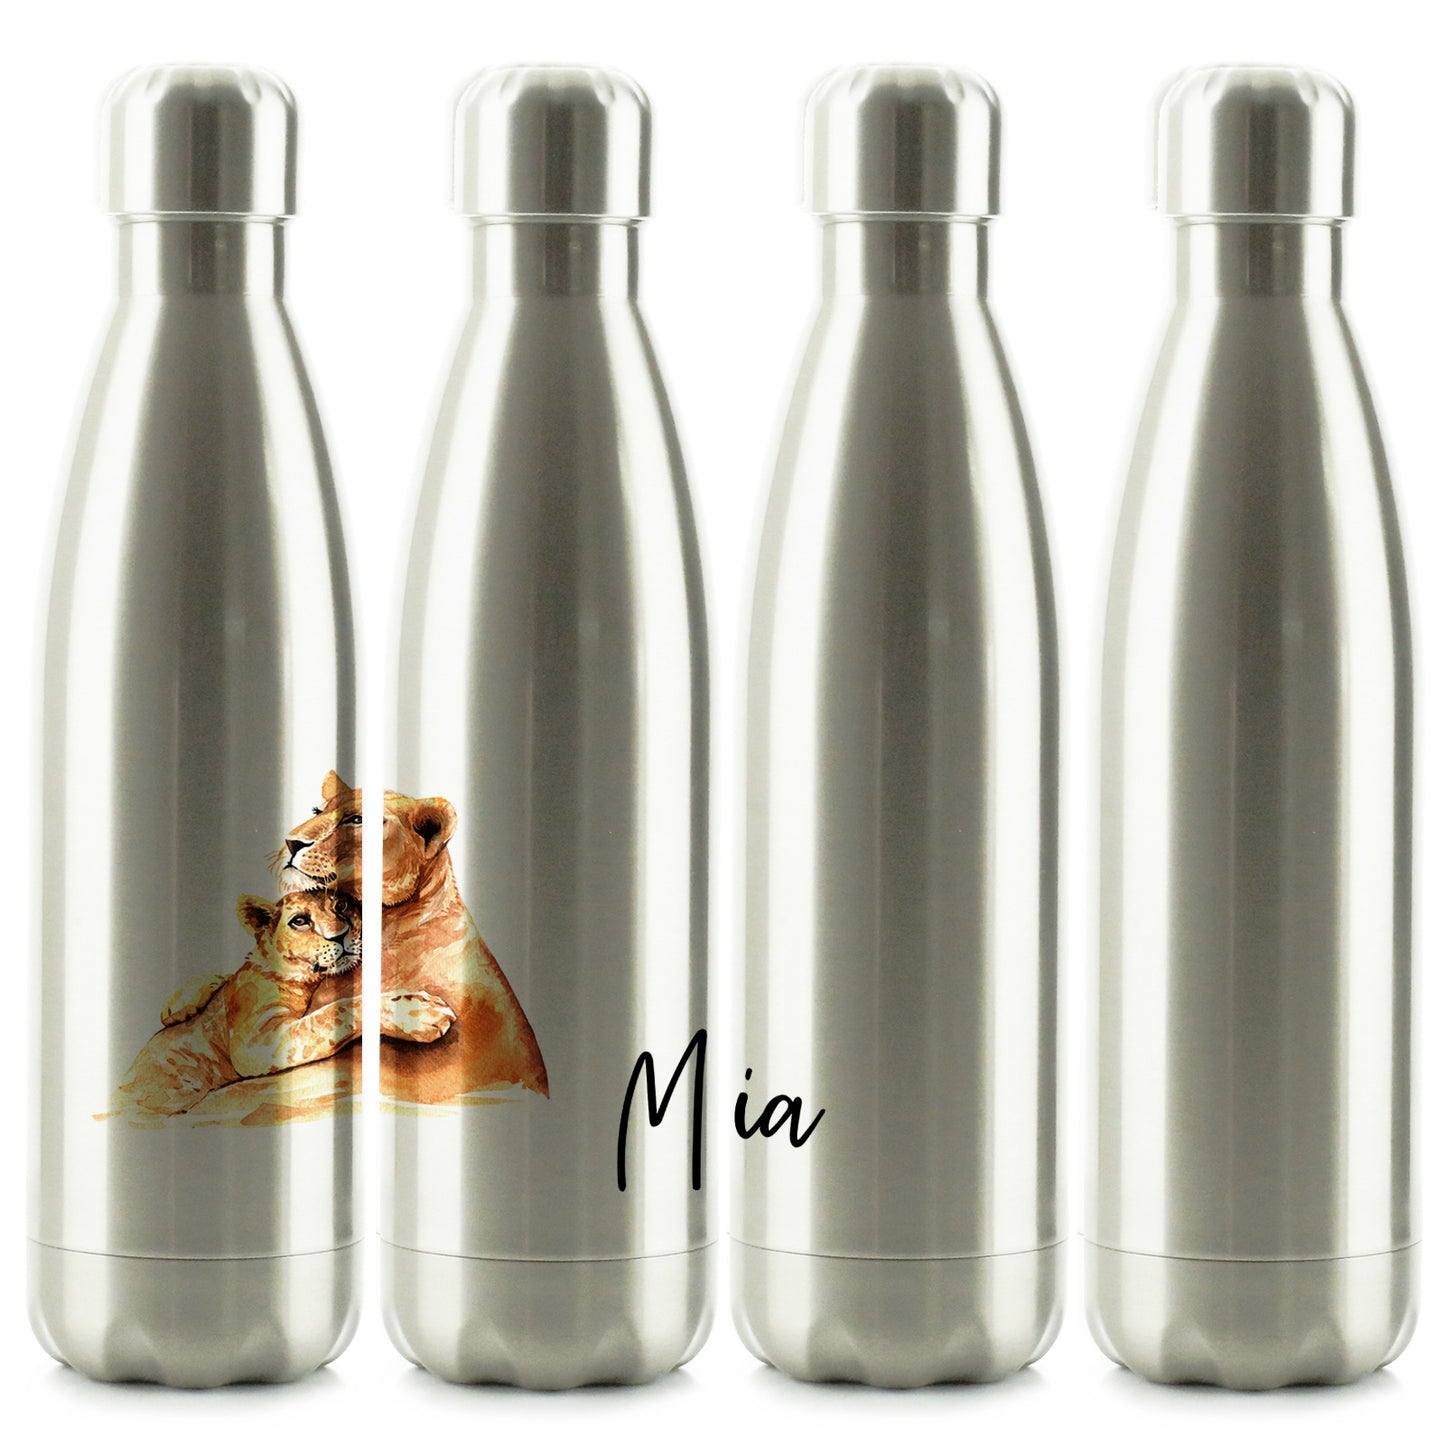 Personalised Cola Bottle with Welcoming Text and Embracing Mum and Baby Lions